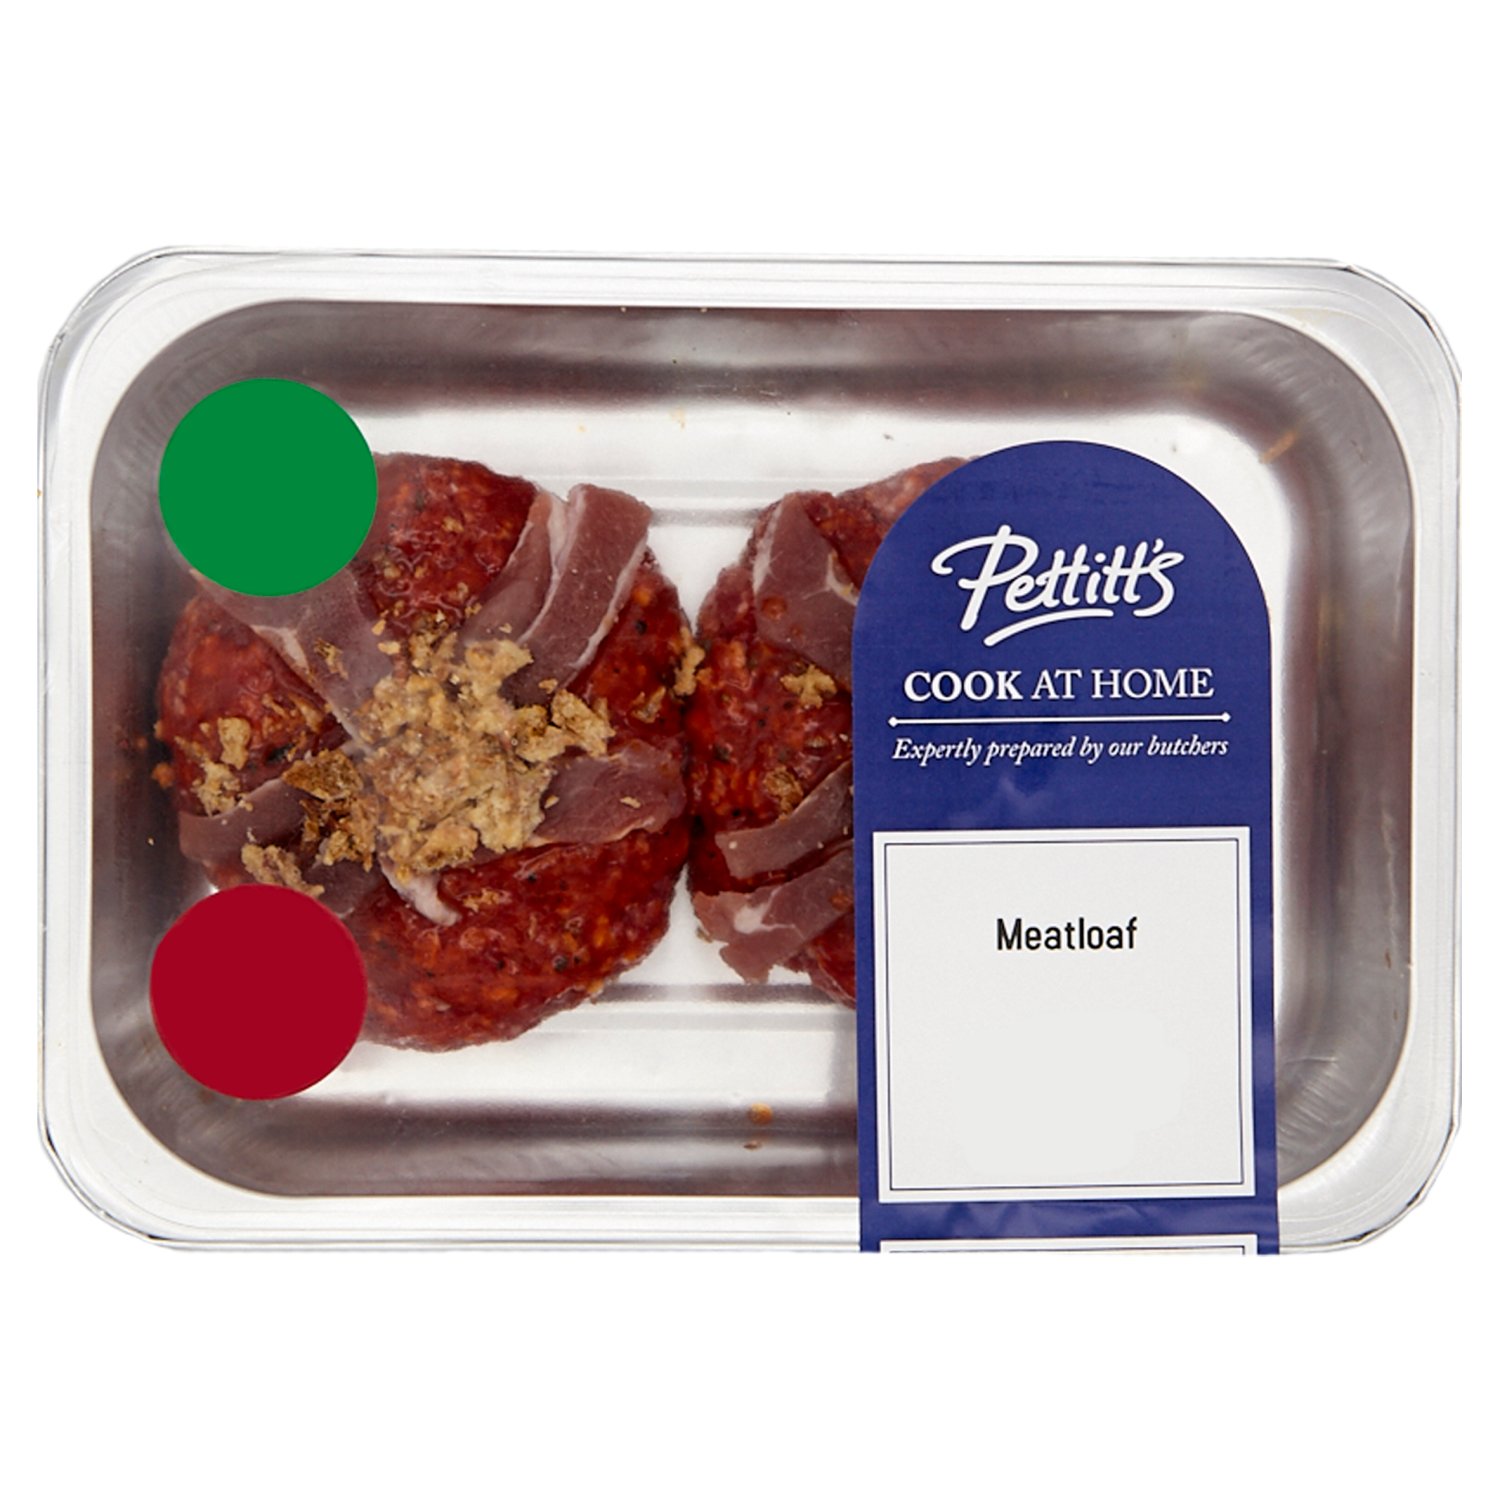 Pettitt's Cook at Home Meatloaf (1 Piece)